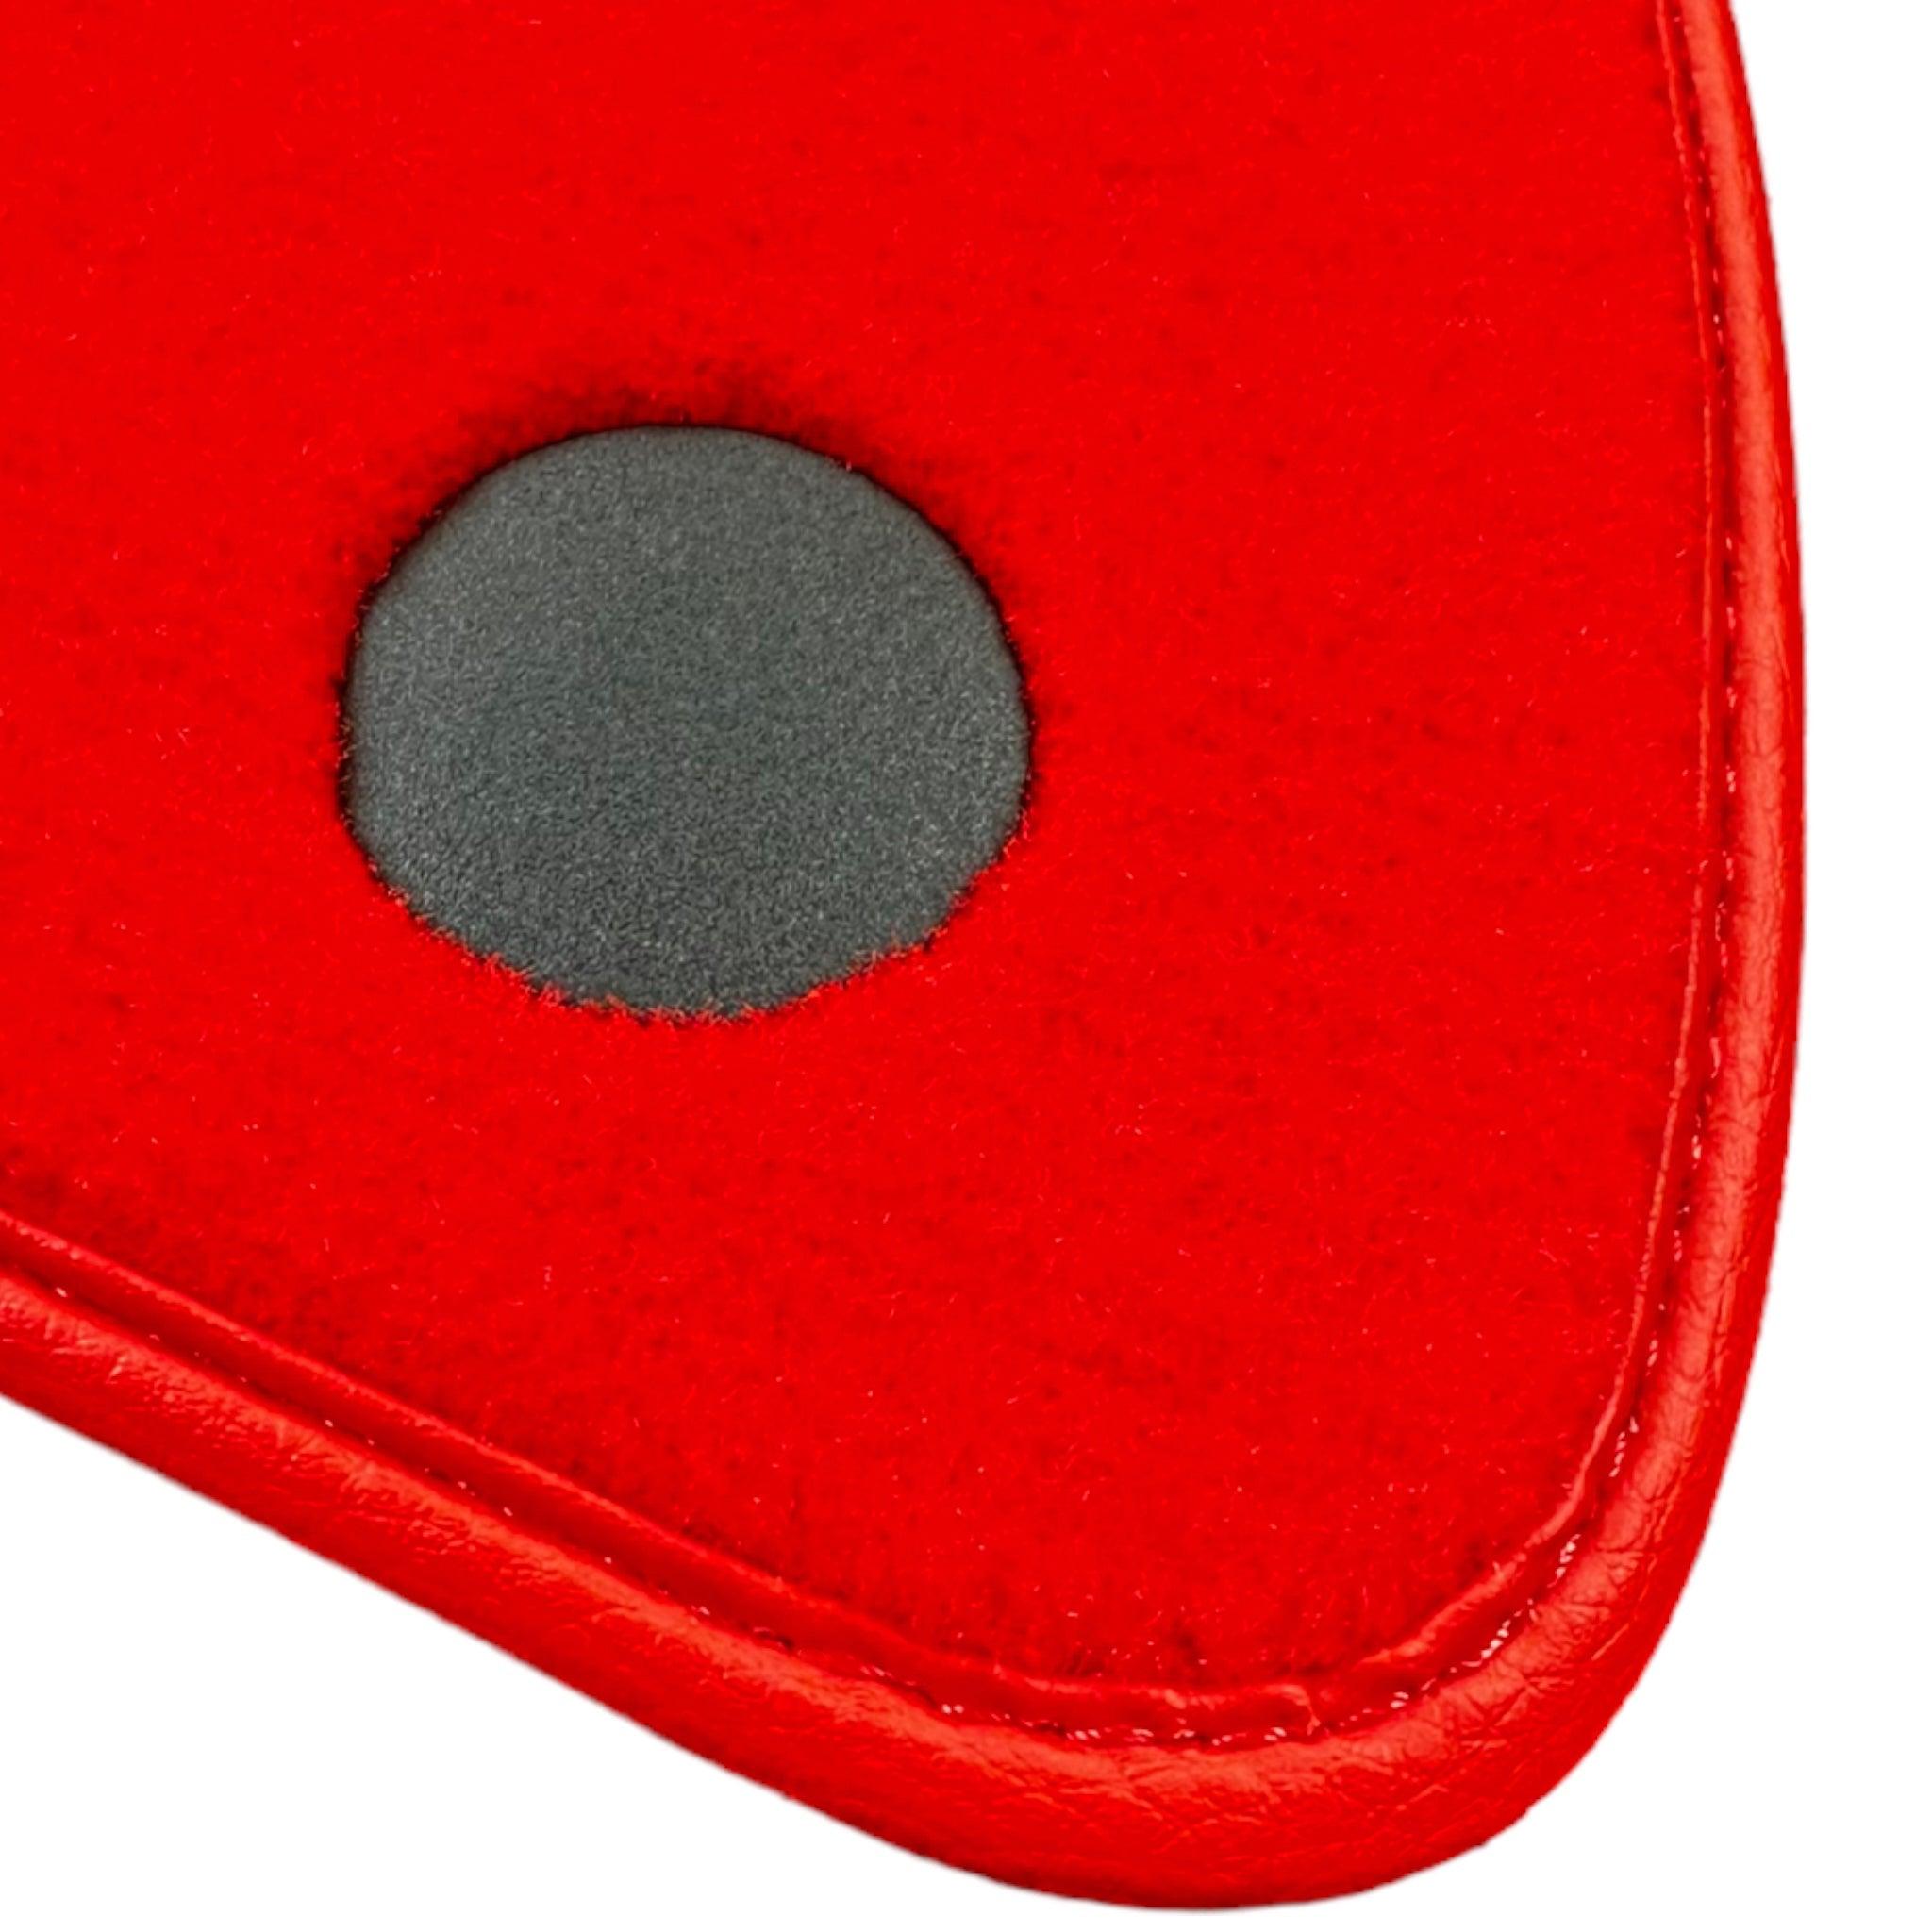 Red Floor Mats For Mercedes Benz S-Class C126 Coupe (1981-1991) | Limited Edition